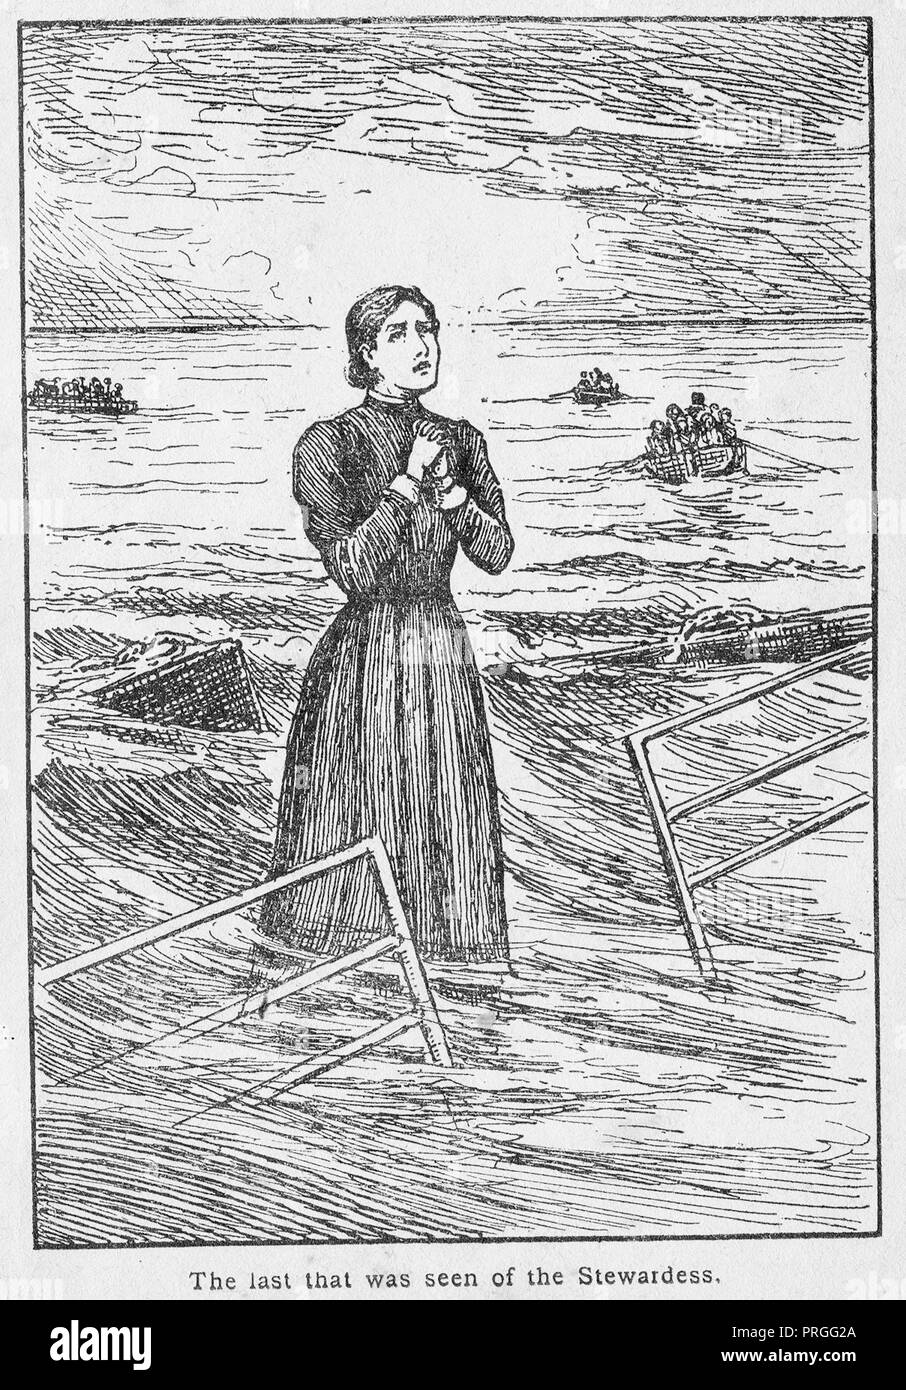 1899 illustration of the wreck of the 'Stella' on Casquets Rocks, Channel Islands - Widow,  Mrs Mary Ann Rogers, Stewardess & rescue heroine who went down with the twin screw steamer  - The ship was named the Titanic of the Chanel Islands - Anglican Liverpool Cathedral chose  Mary as twenty one of the  “noble women” for depicted in stained glass windows. She is depicted in her window alongside Grace Darling and Elizabeth Fry. Stock Photo